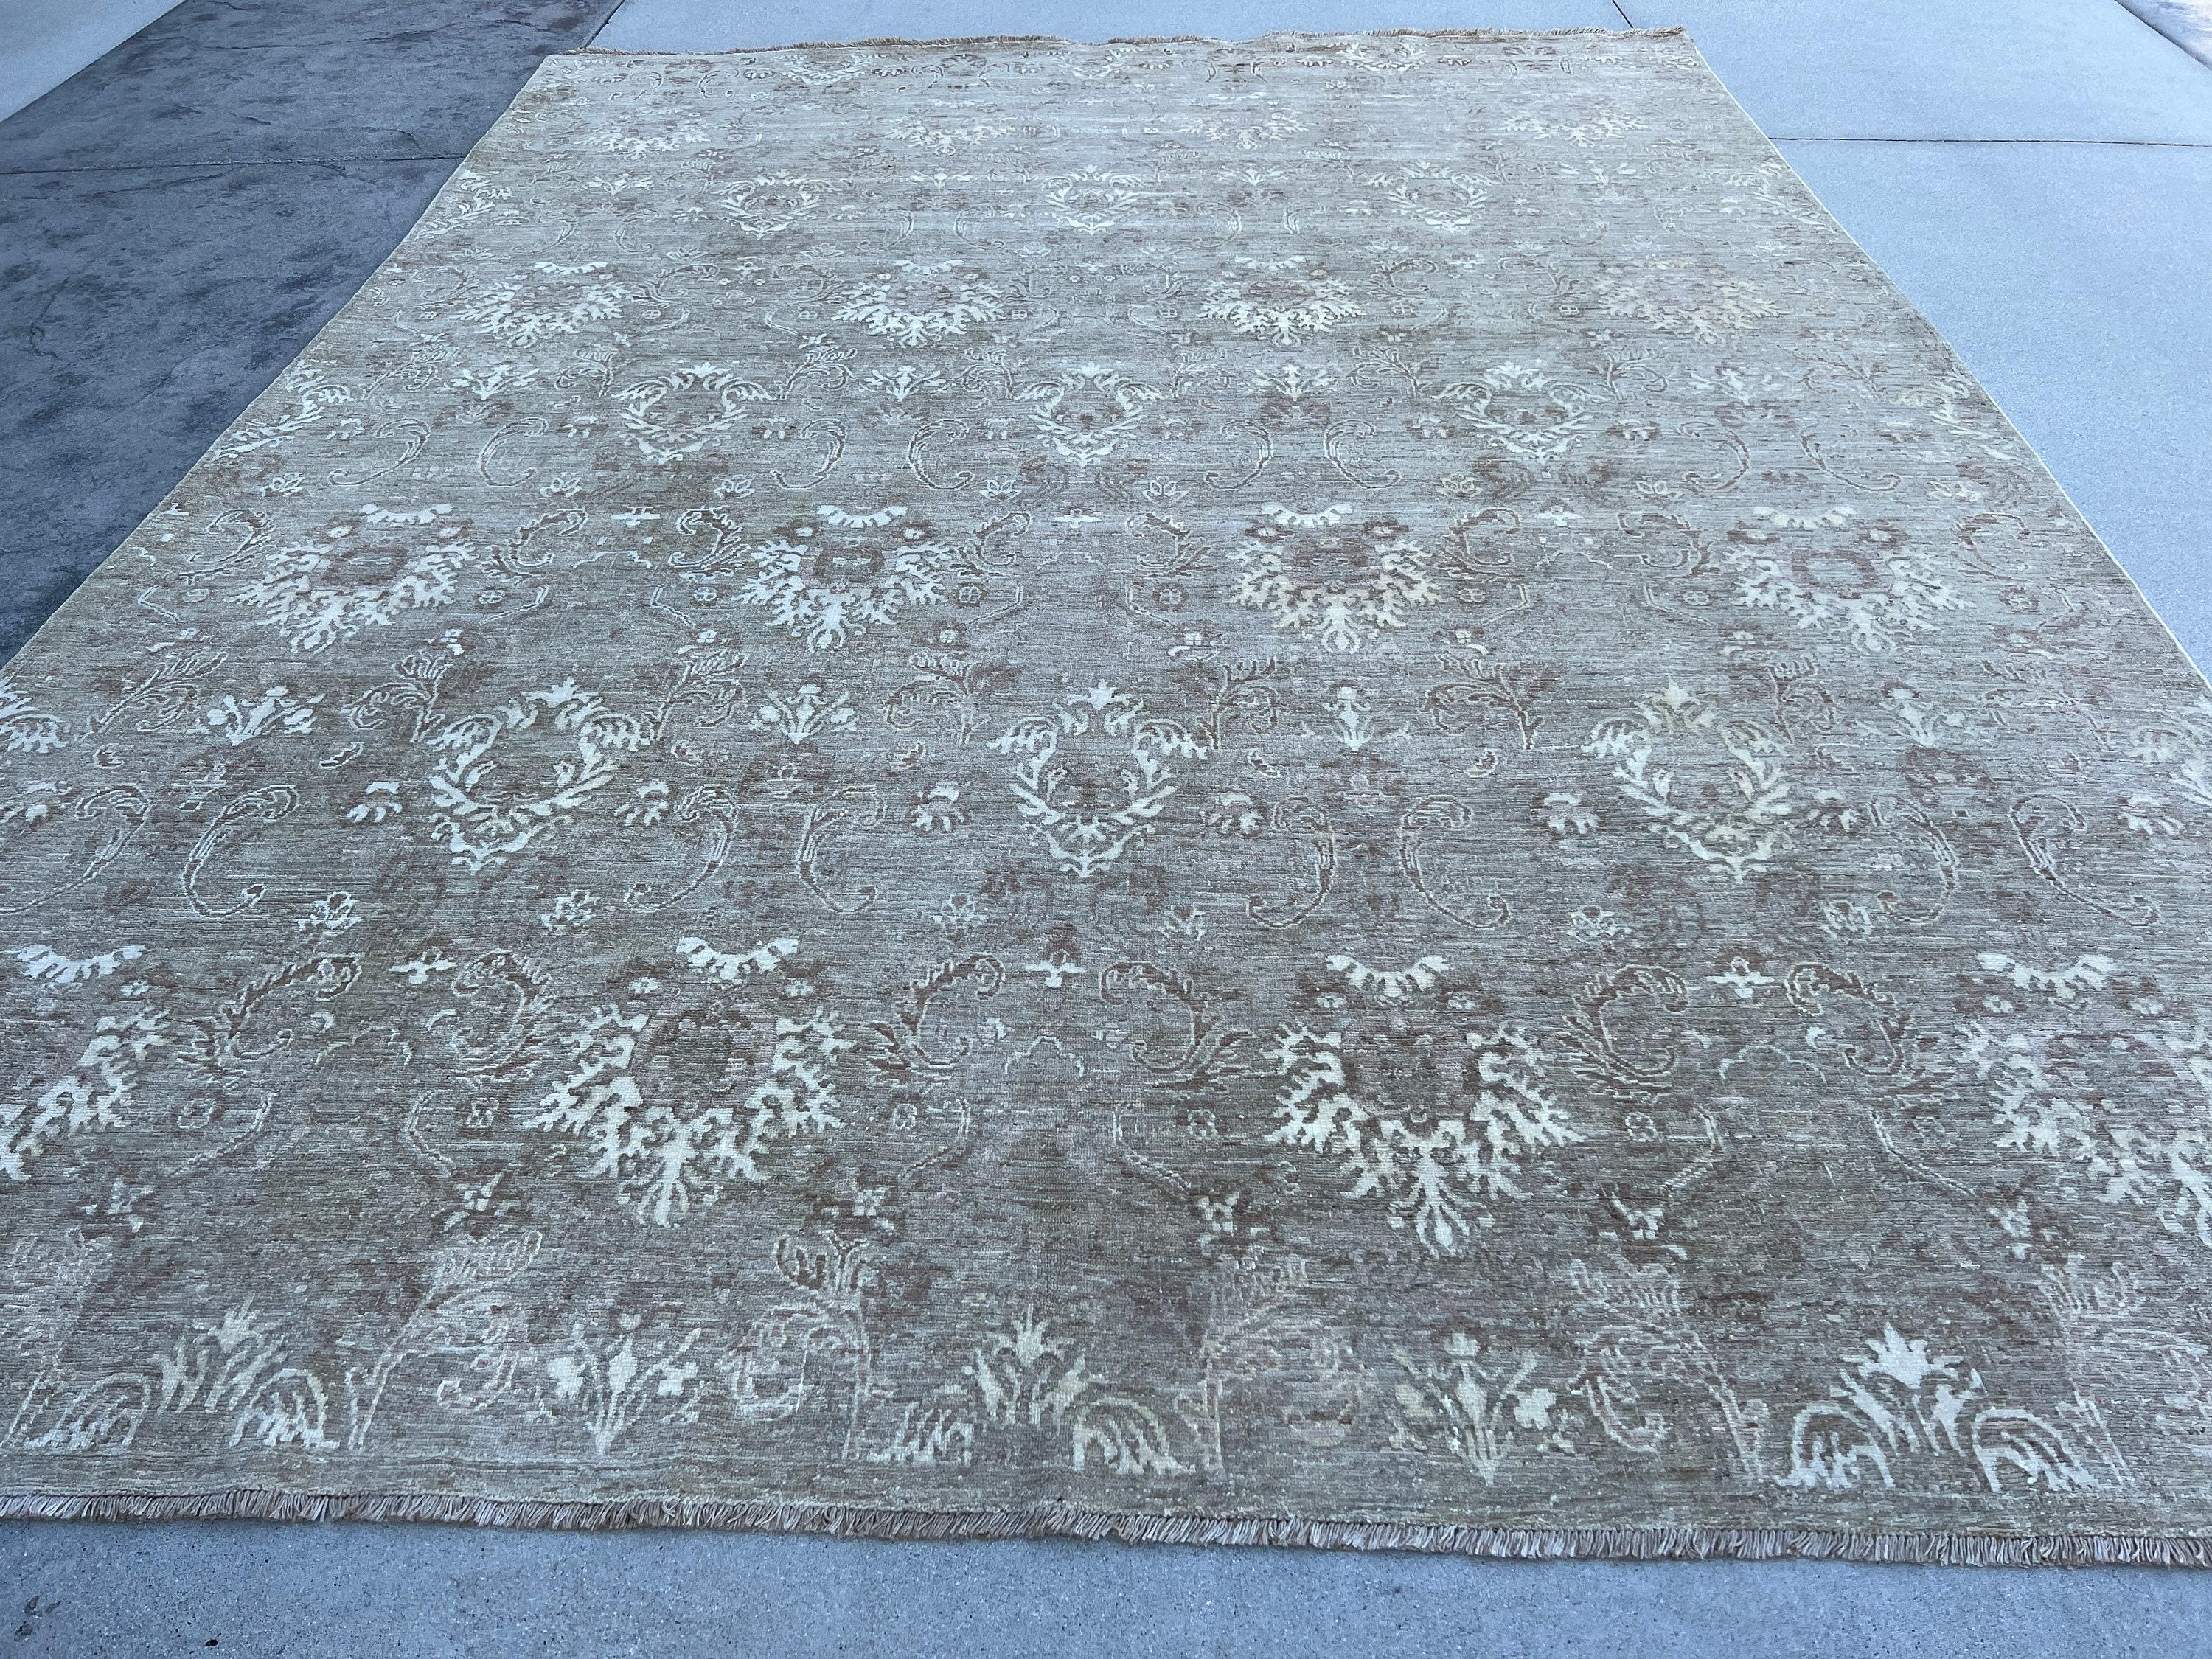 9x11 Hand-Knotted Afghan Rug Premium Hand-Spun Afghan Wool Modern Muted Neutral In New Condition For Sale In San Marcos, CA